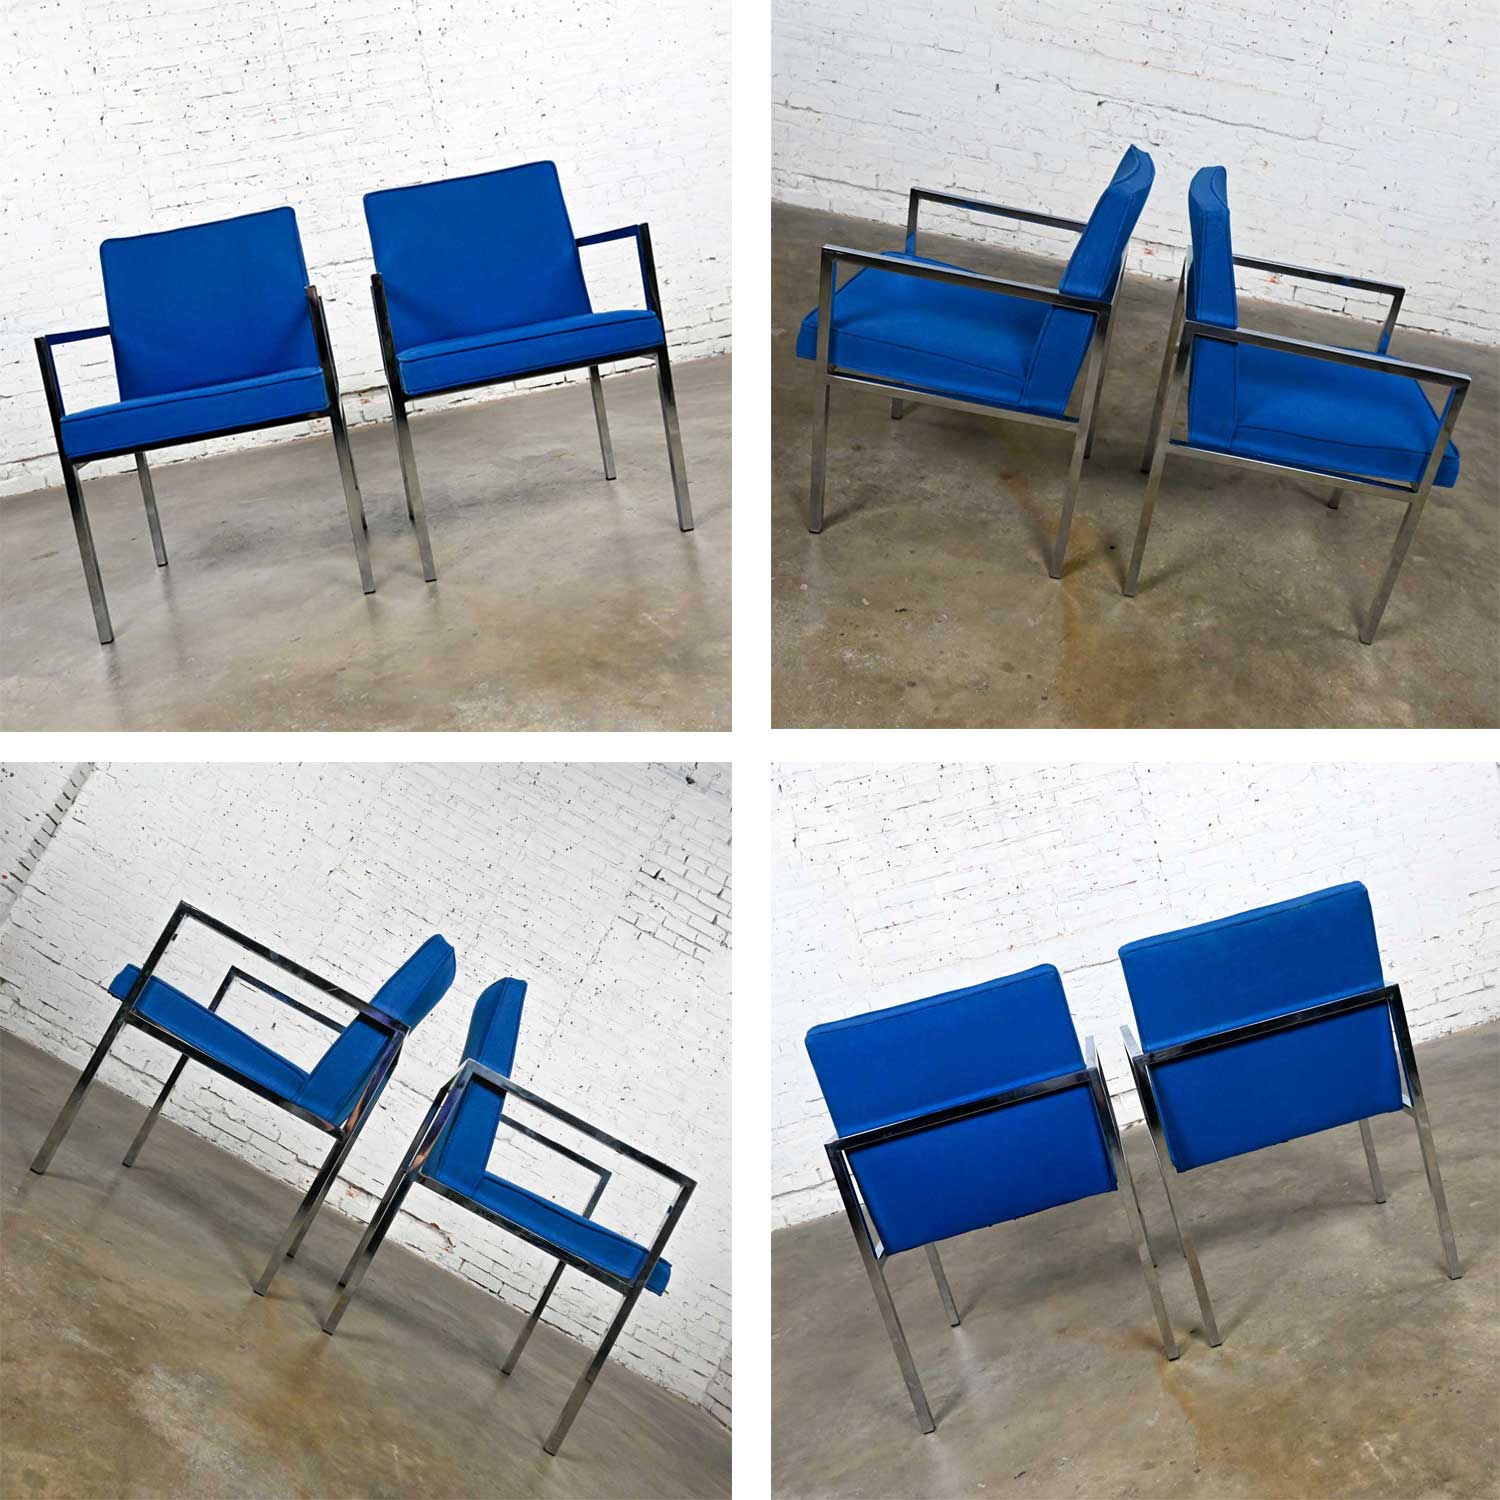 Vintage Mid-Century Modern Chrome & Royal Blue Fabric Armchairs by Hibriten Chair Company